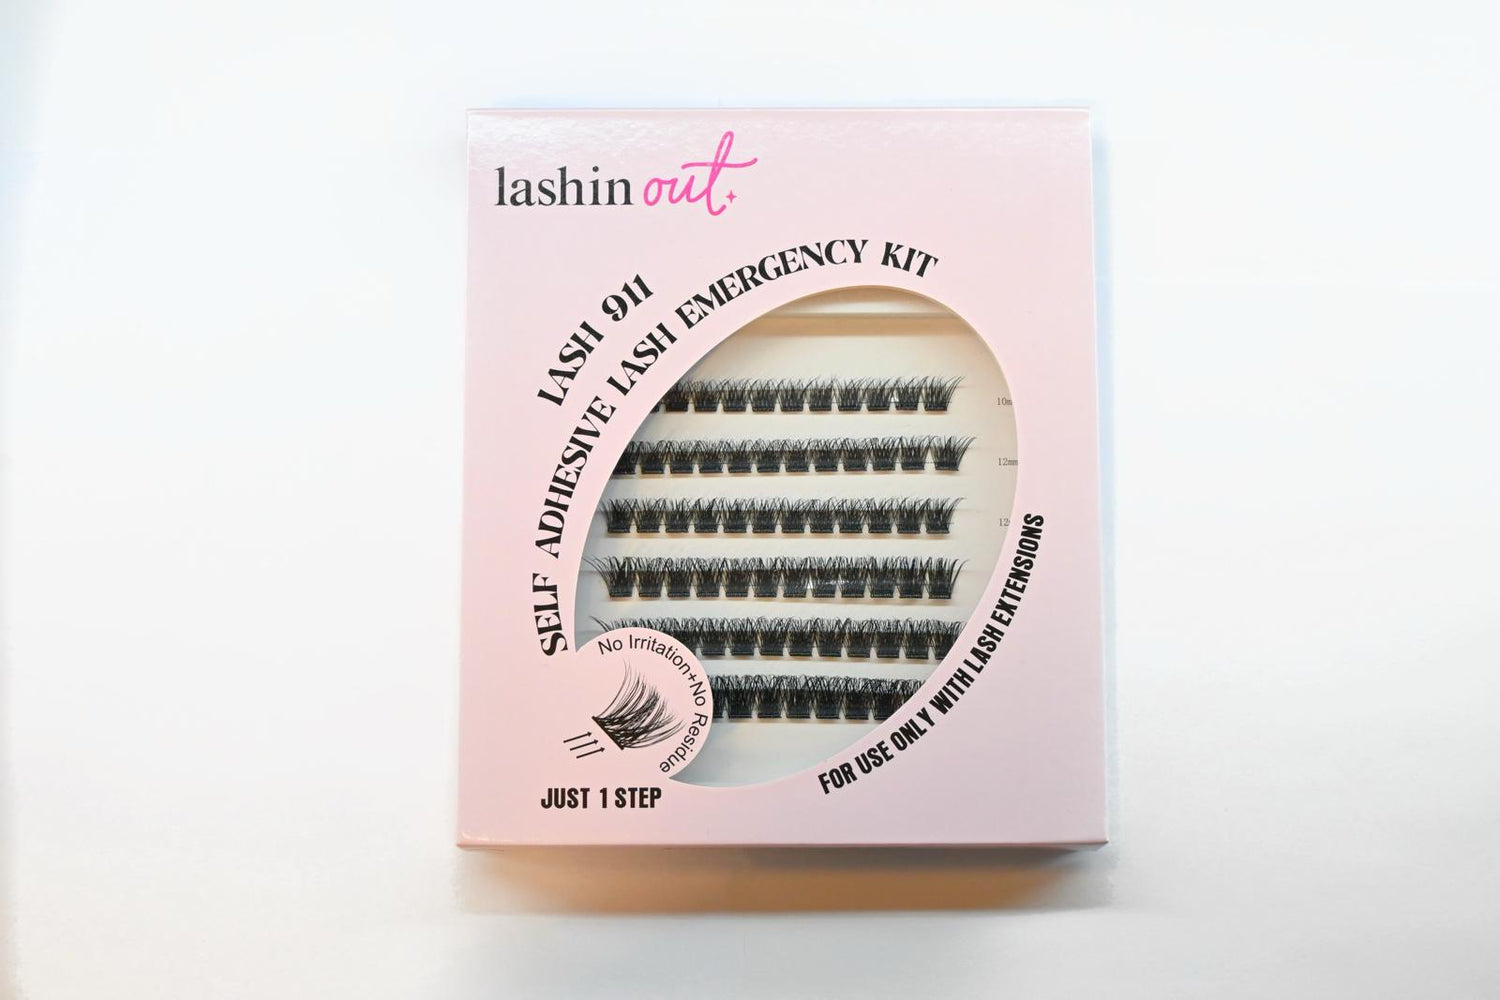 A box of Lashin Out Lash 911 lash clusters. The box is pink with a window in the front showing rows of lash clusters. 